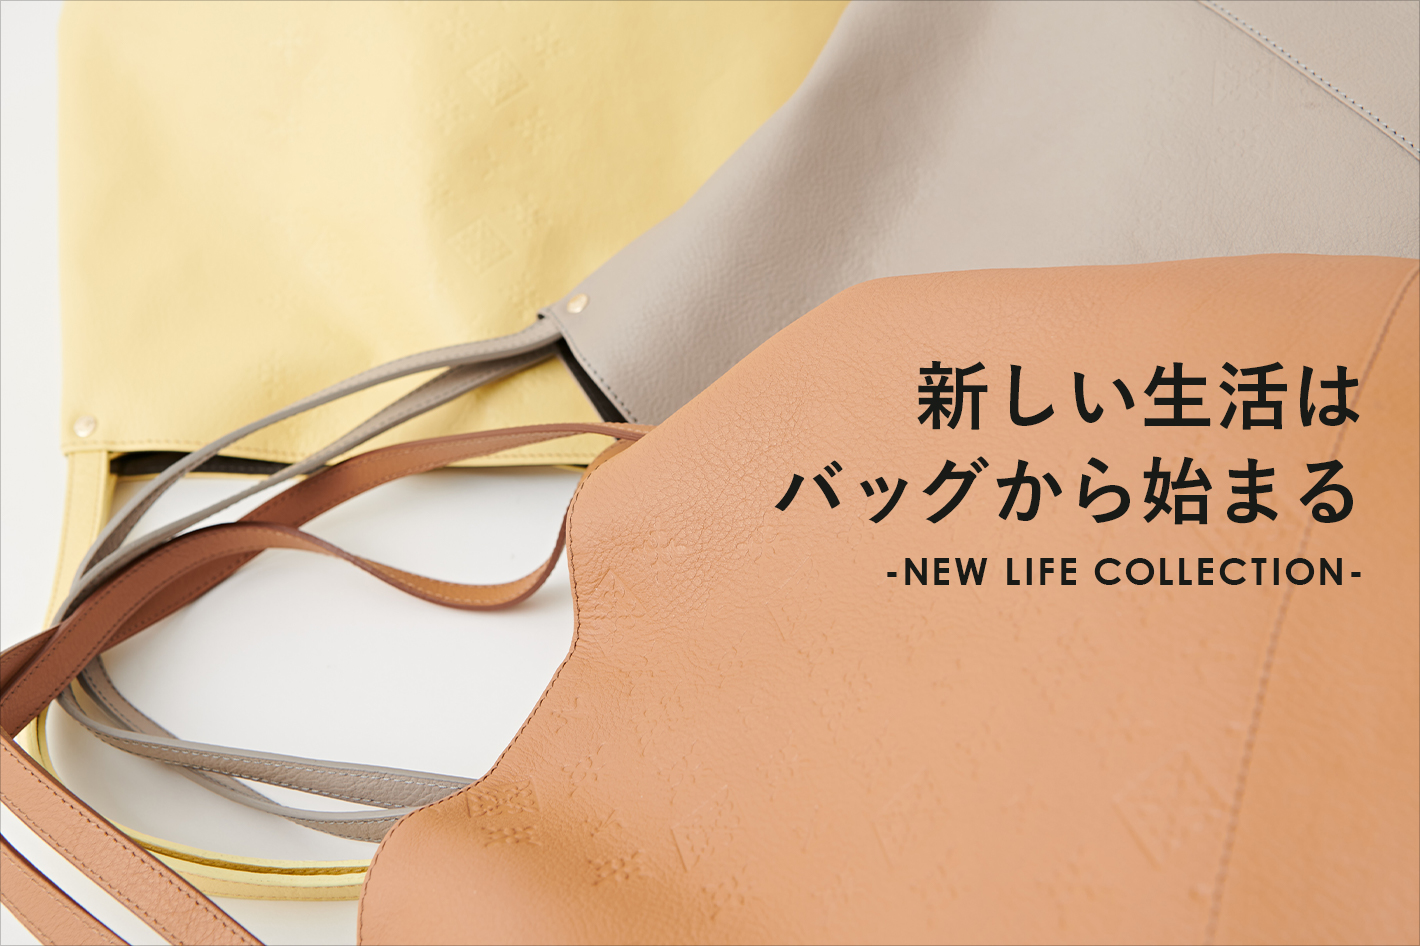 russet 新しい生活はバッグから始まる-NEW LIFE COLLECTION-